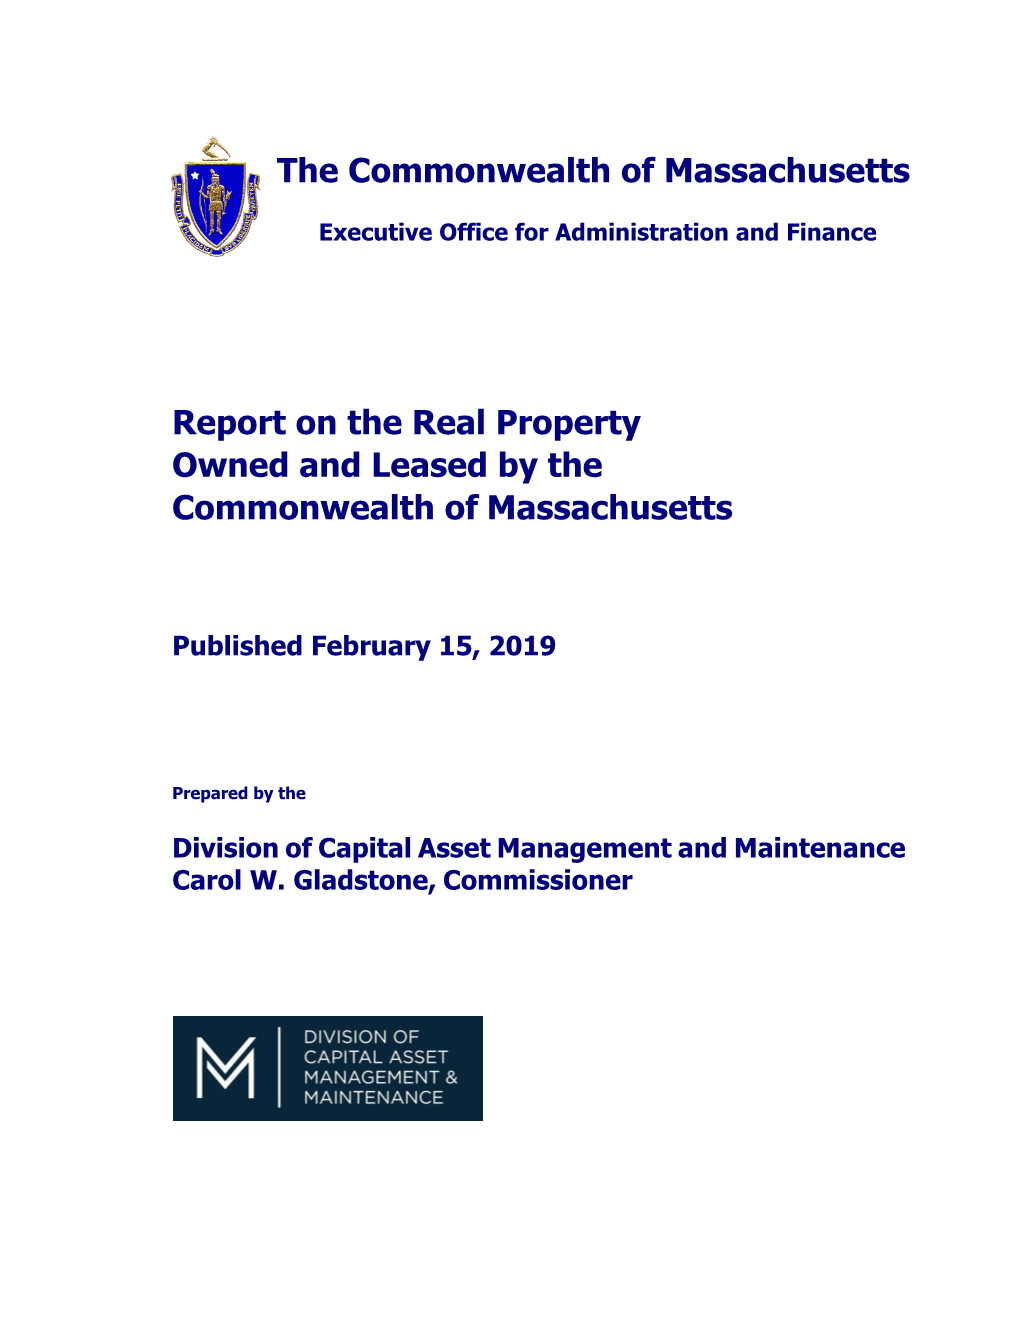 FY19 Real Property Report